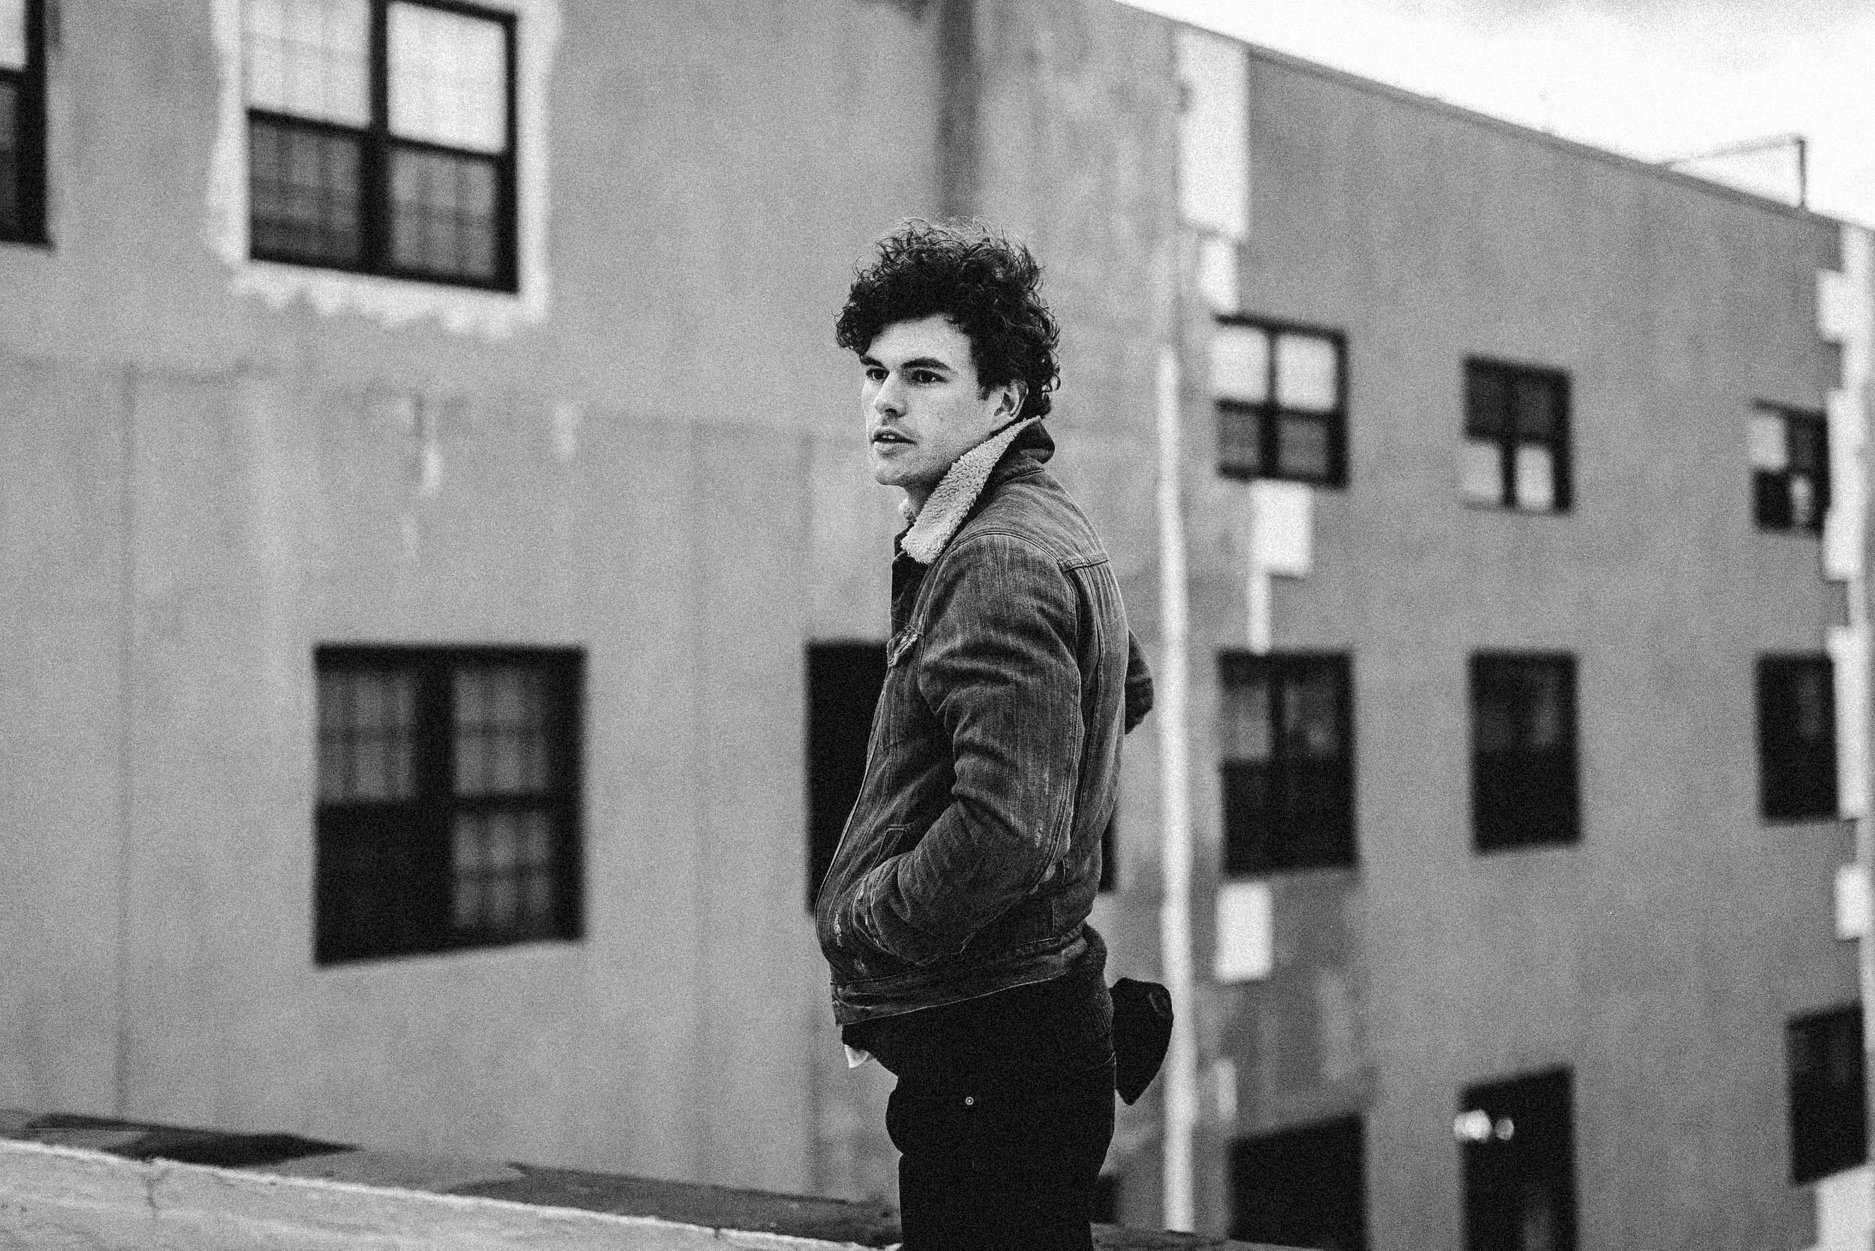 Vance Joy’s ‘Dream Your Life Away’ hits double Platinum, ‘Nation Of Two’ certified Gold